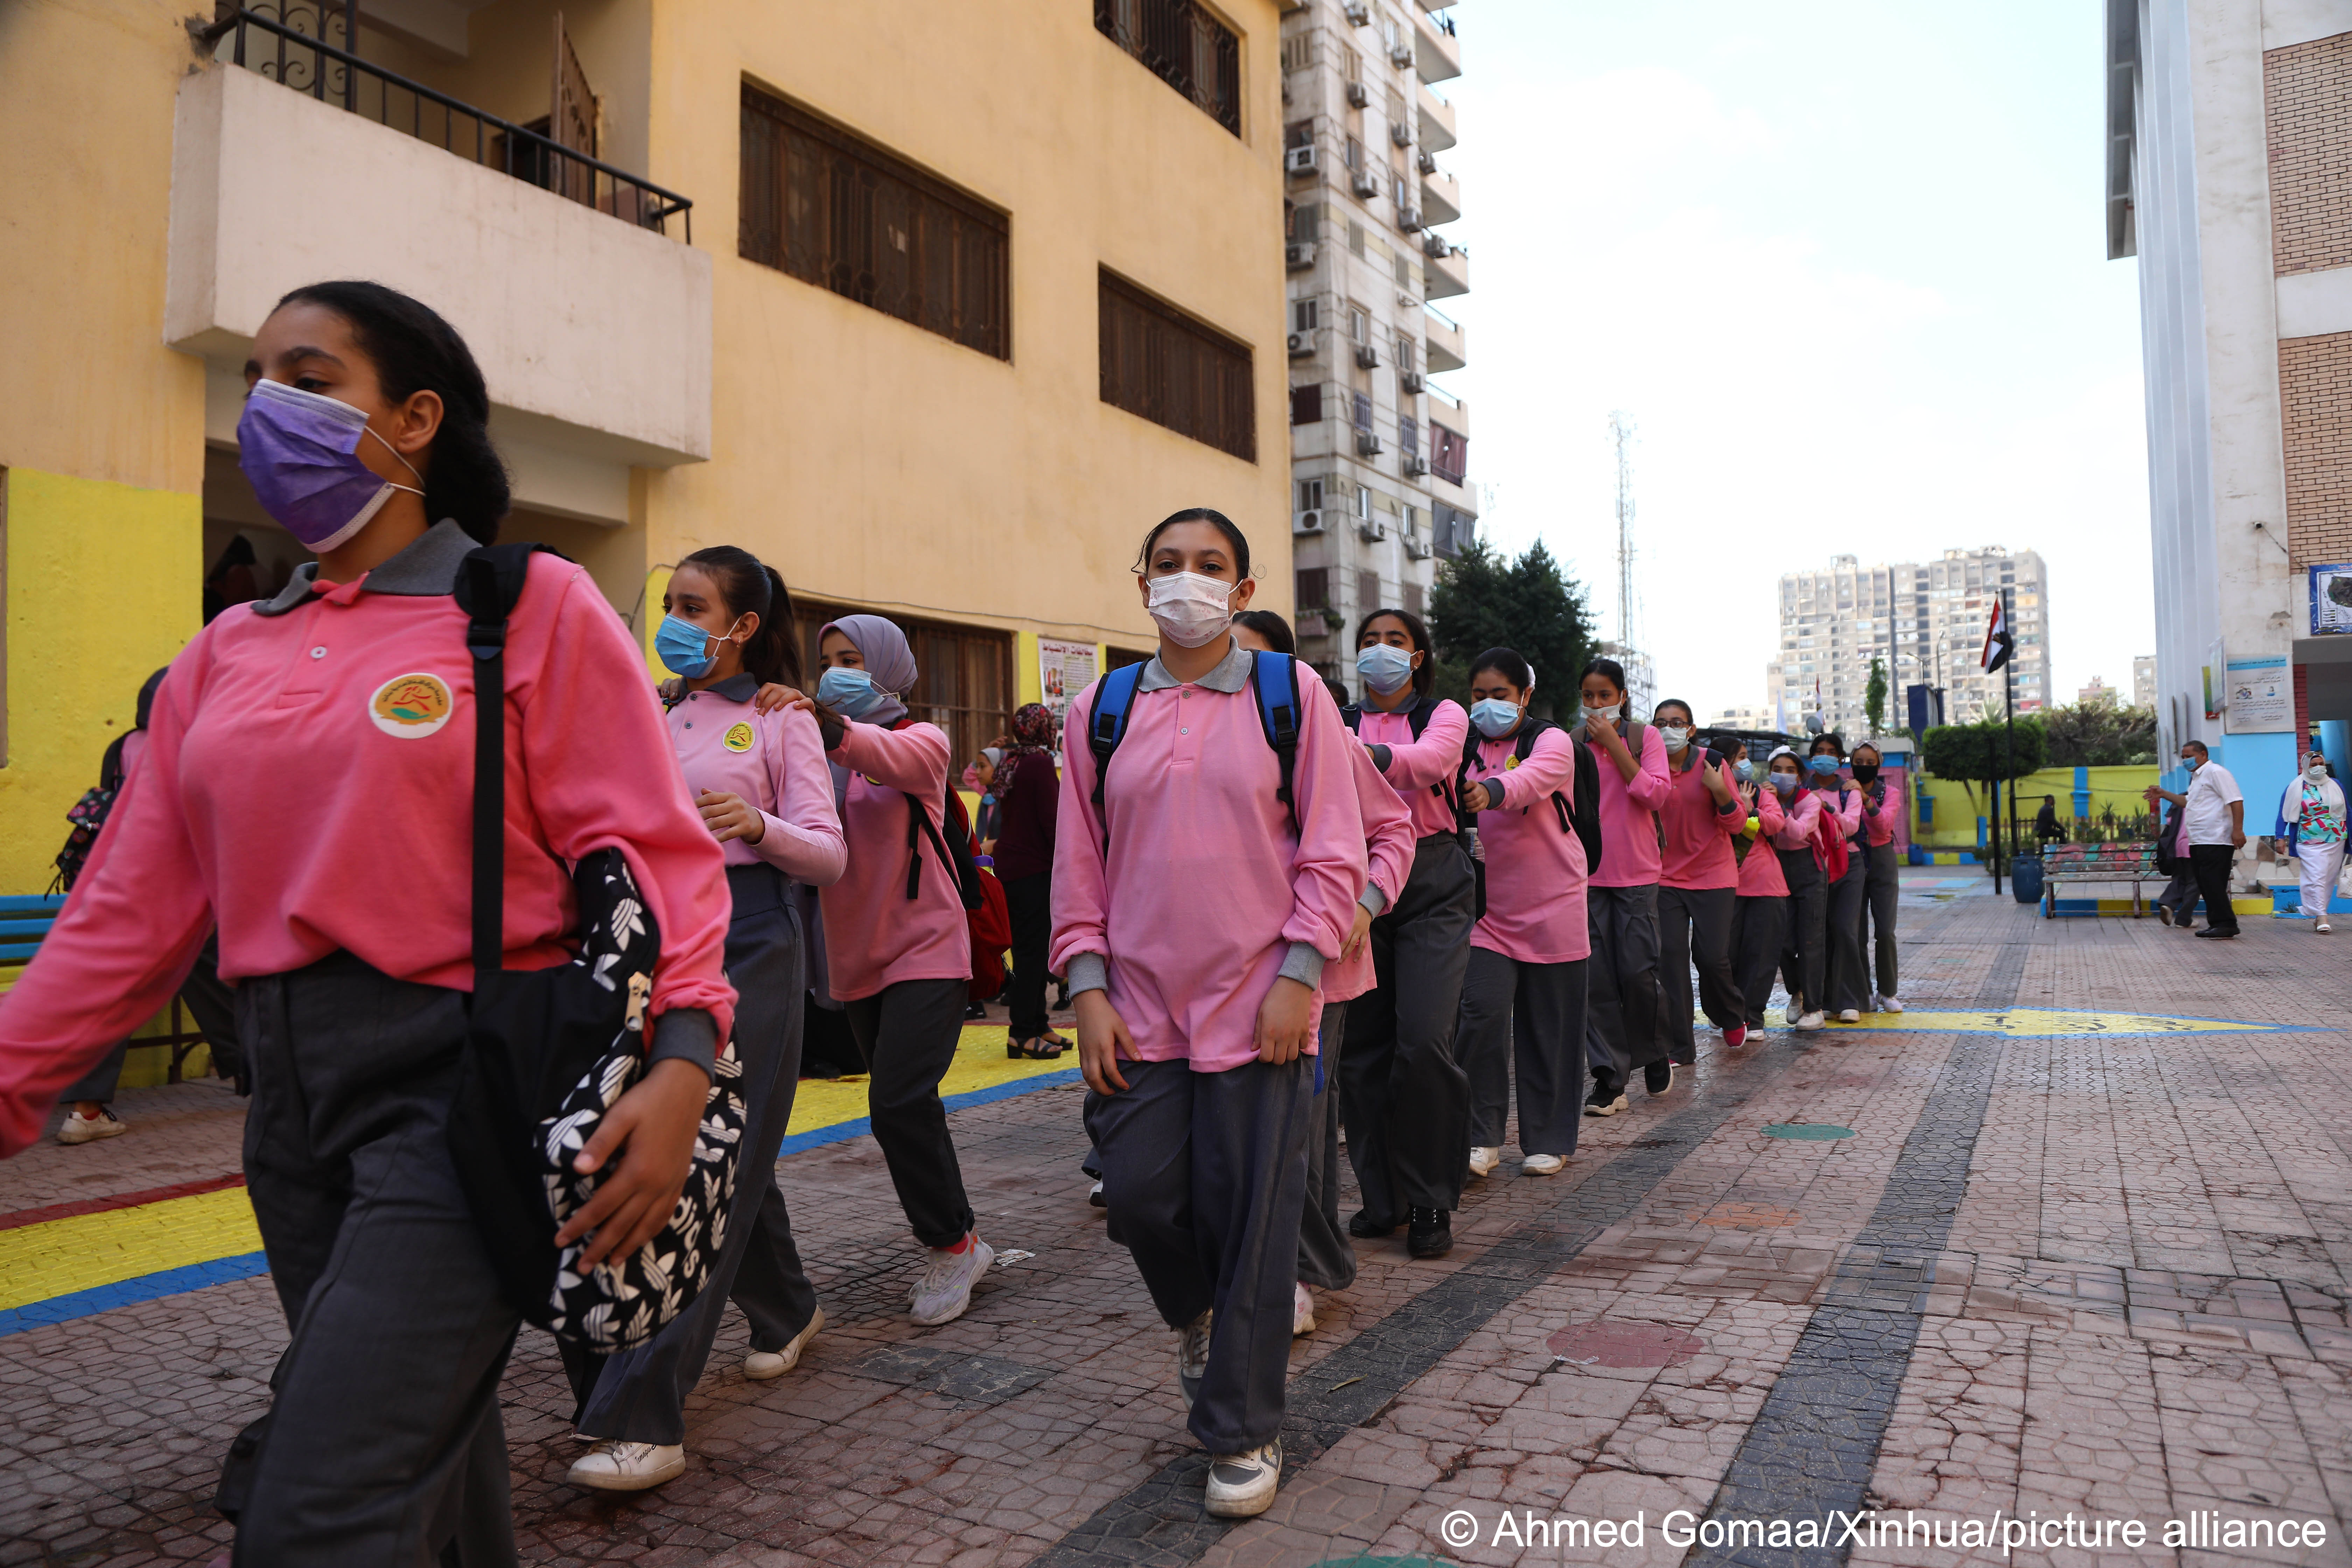 Schoolgirls wearing face masks form a queue outside a school in the Egyptian capital Cairo on 10 October 2021 (photo: Ahmed Gomaa / Xinhua News Agency/ picture alliance)